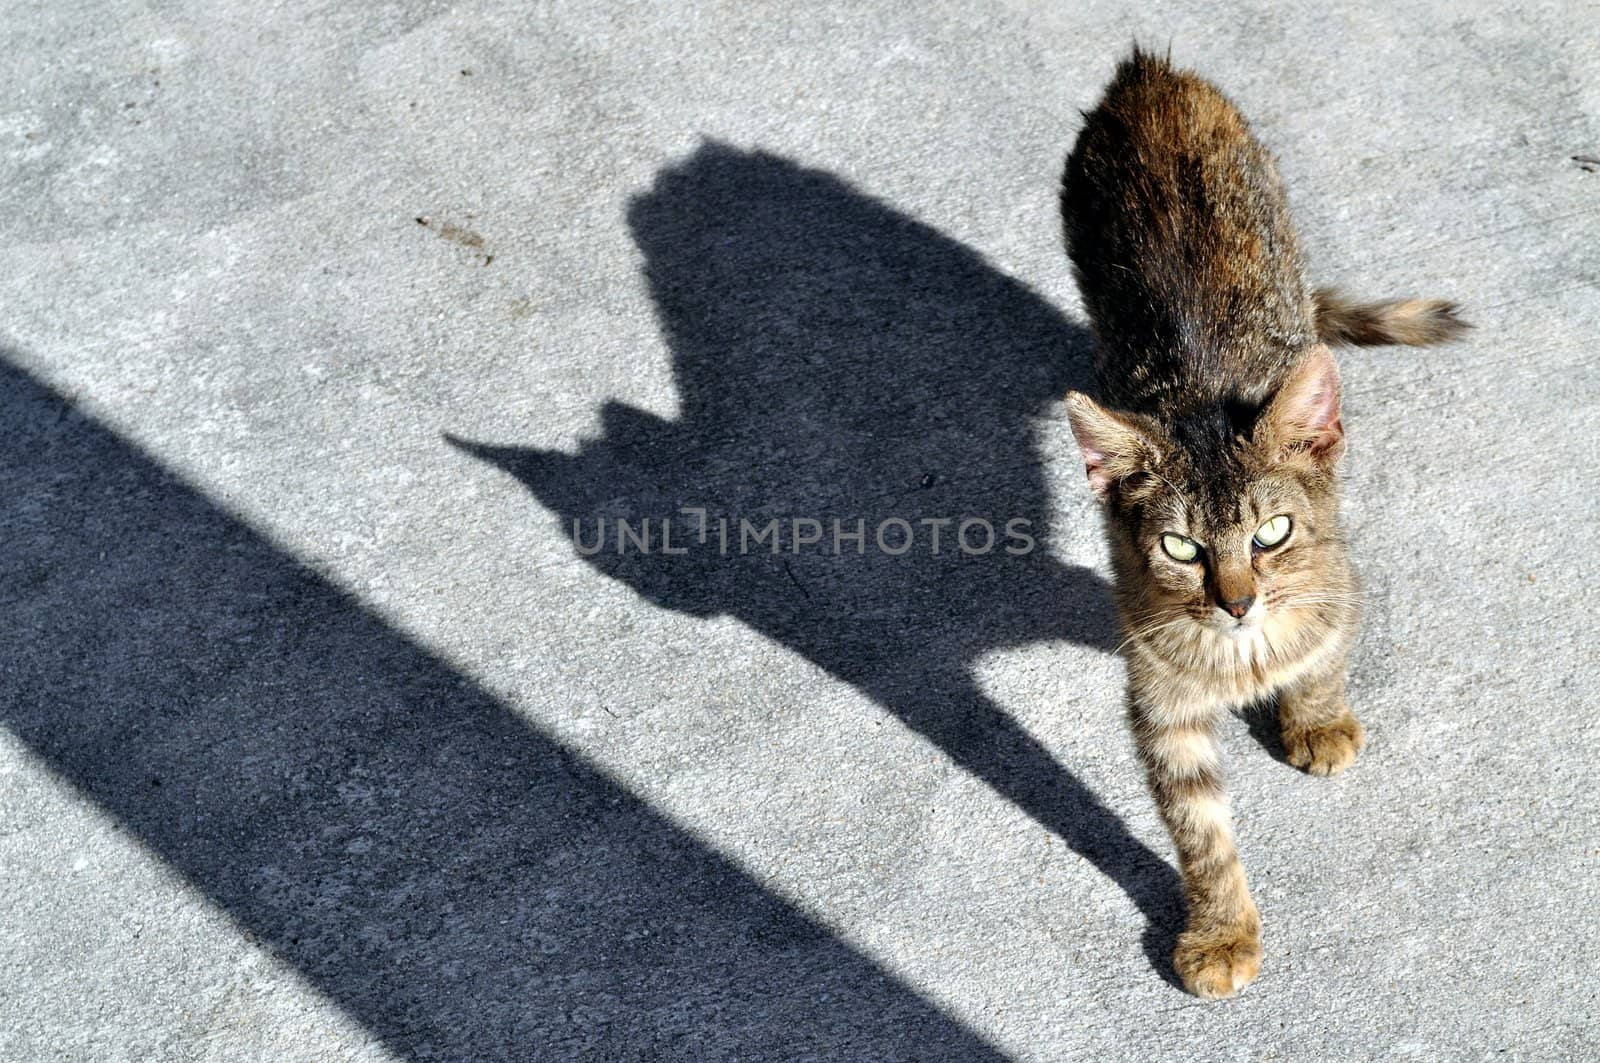 A grey stray cat and its shadow approach the photographer.